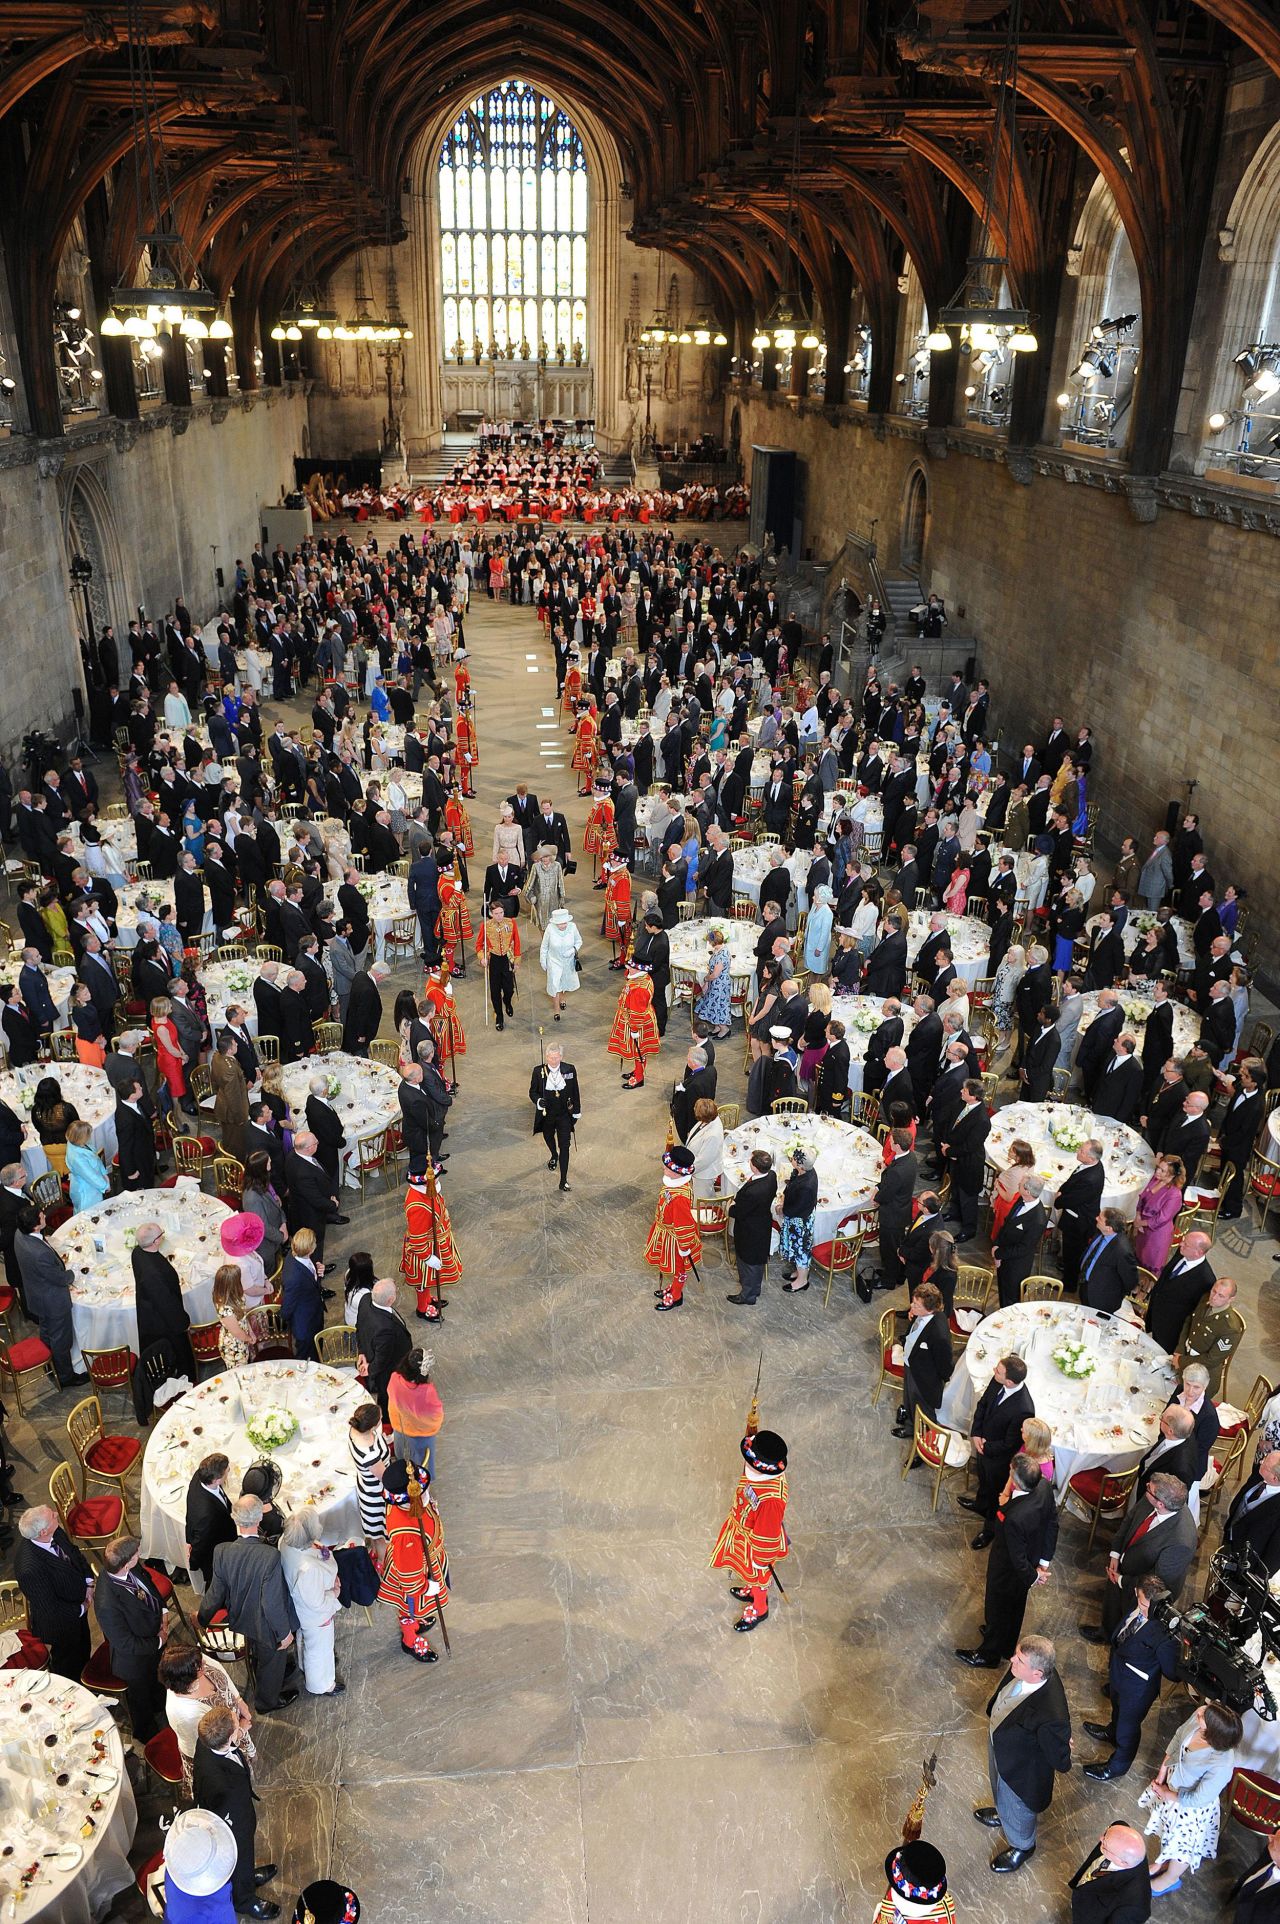 The Queen, the Prince of Wales, the Duchess of Cornwall, the Duchess and Duke of Cambridge and Prince Harry, leave Westminster Hall following the Diamond Jubilee Lunch in 2012.